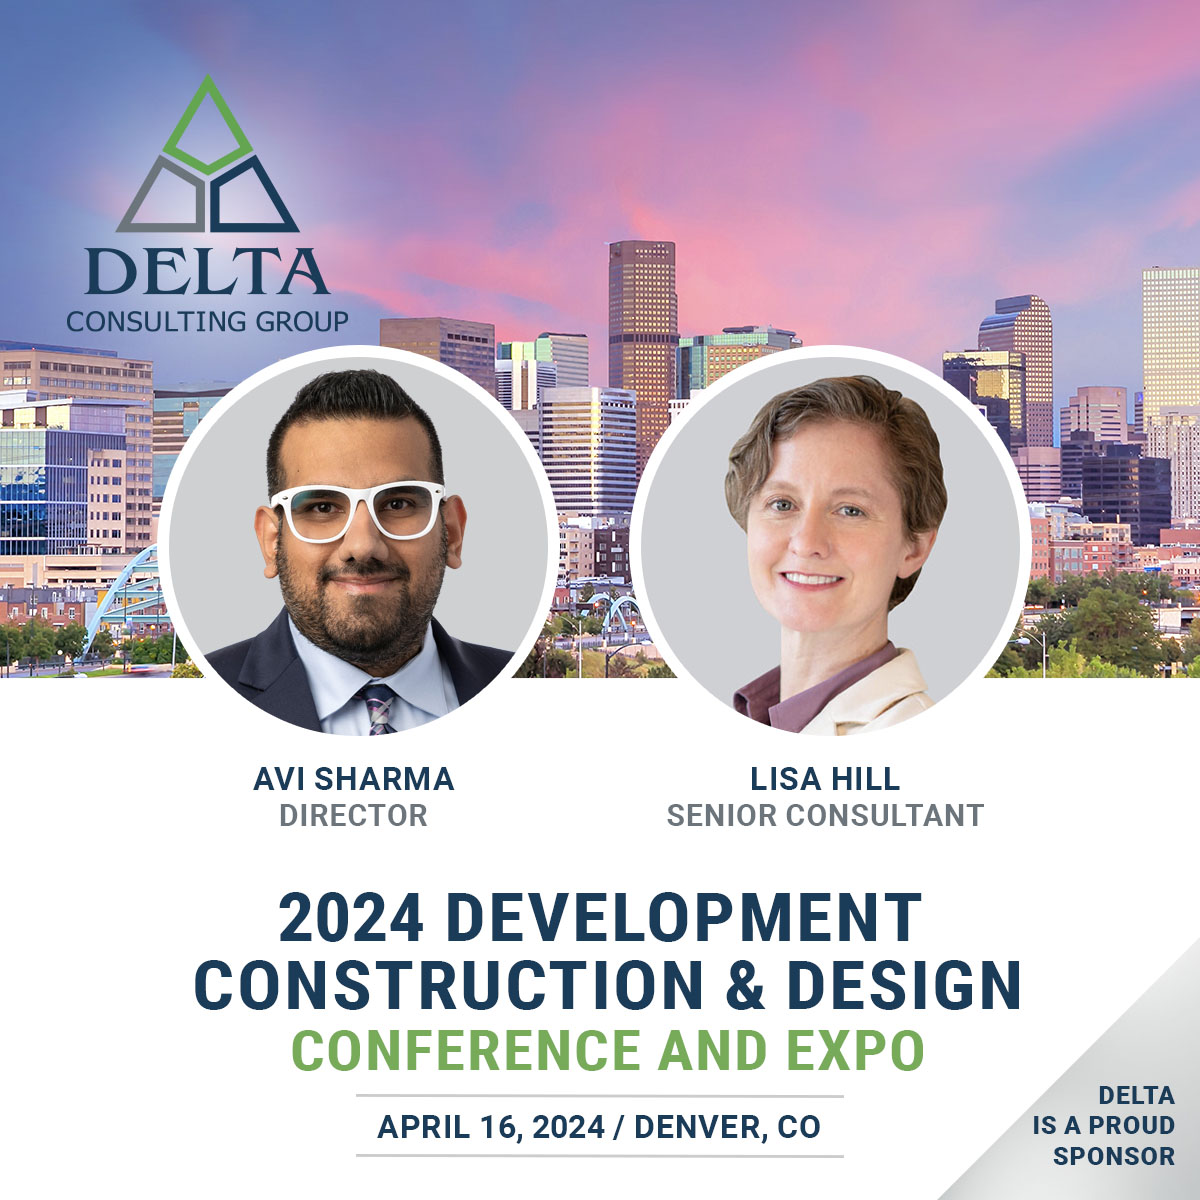 2024 Development, Construction & Design Conference and Expo